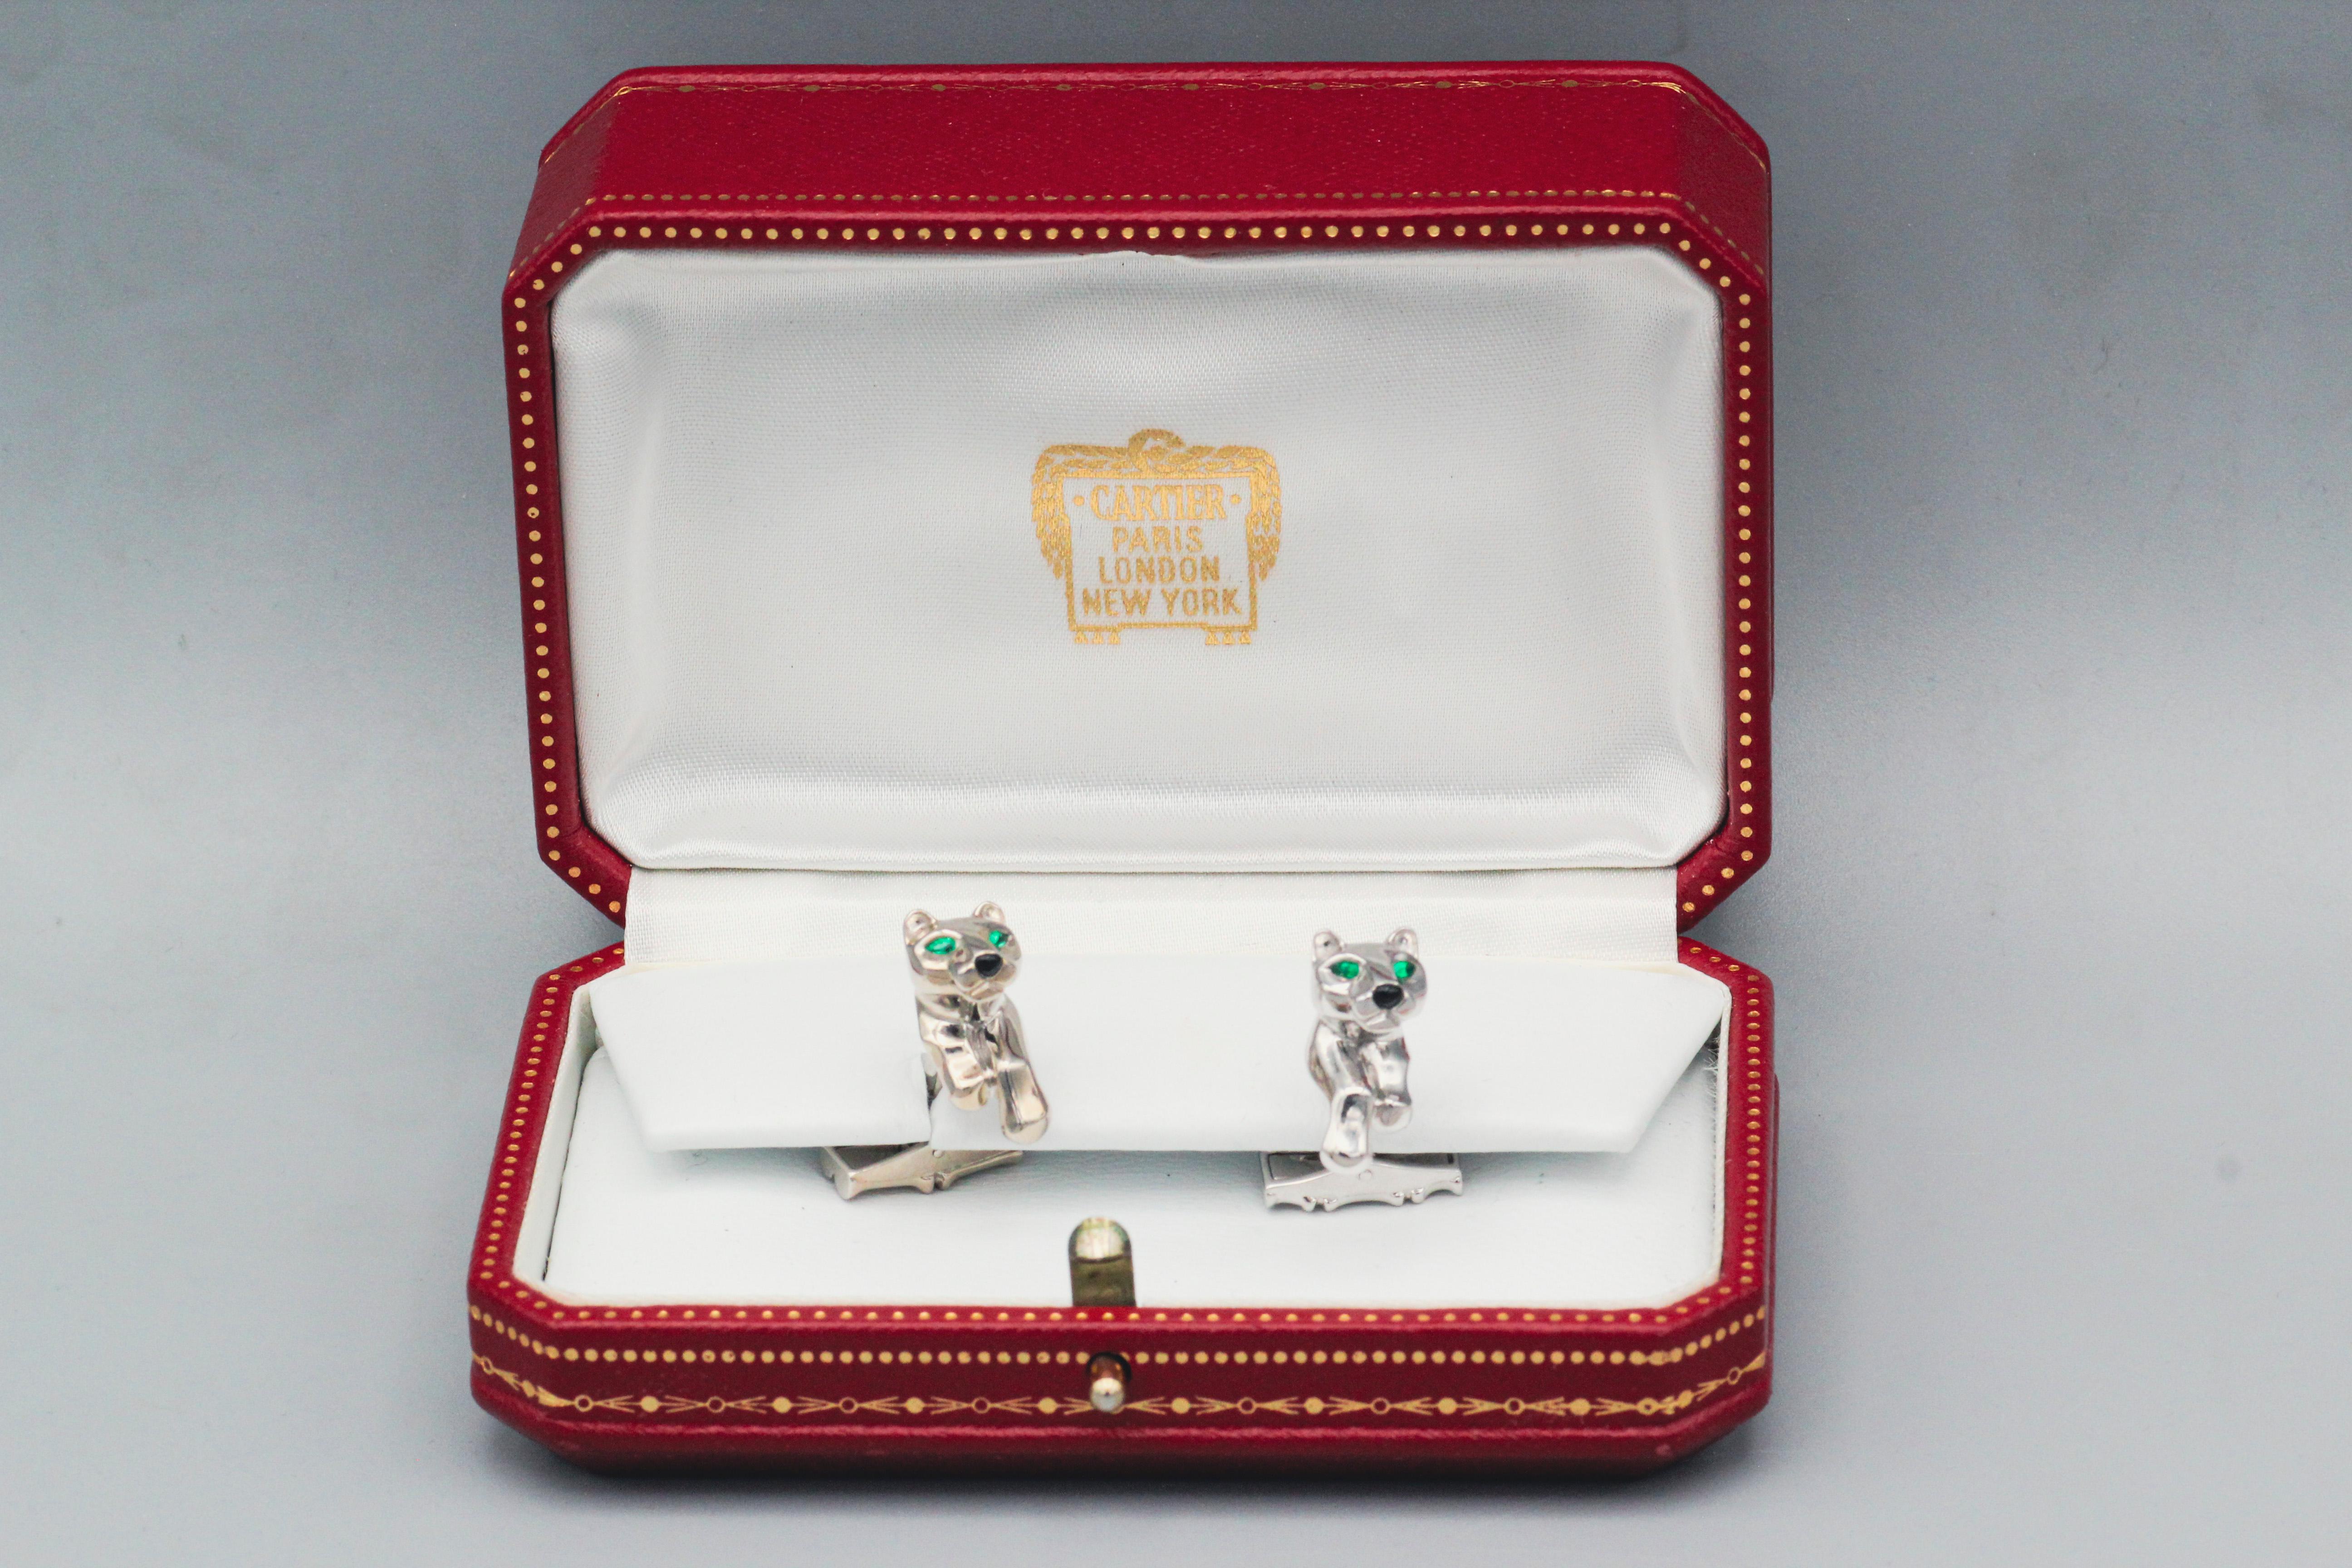 Cartier Panthère Cufflinks: A Timeless Mark of Elegance

Indulge in timeless sophistication with a pair of vintage Cartier Panthère cufflinks. These emblematic pieces showcase the renowned jeweler's expertise in design and craftsmanship, featuring a